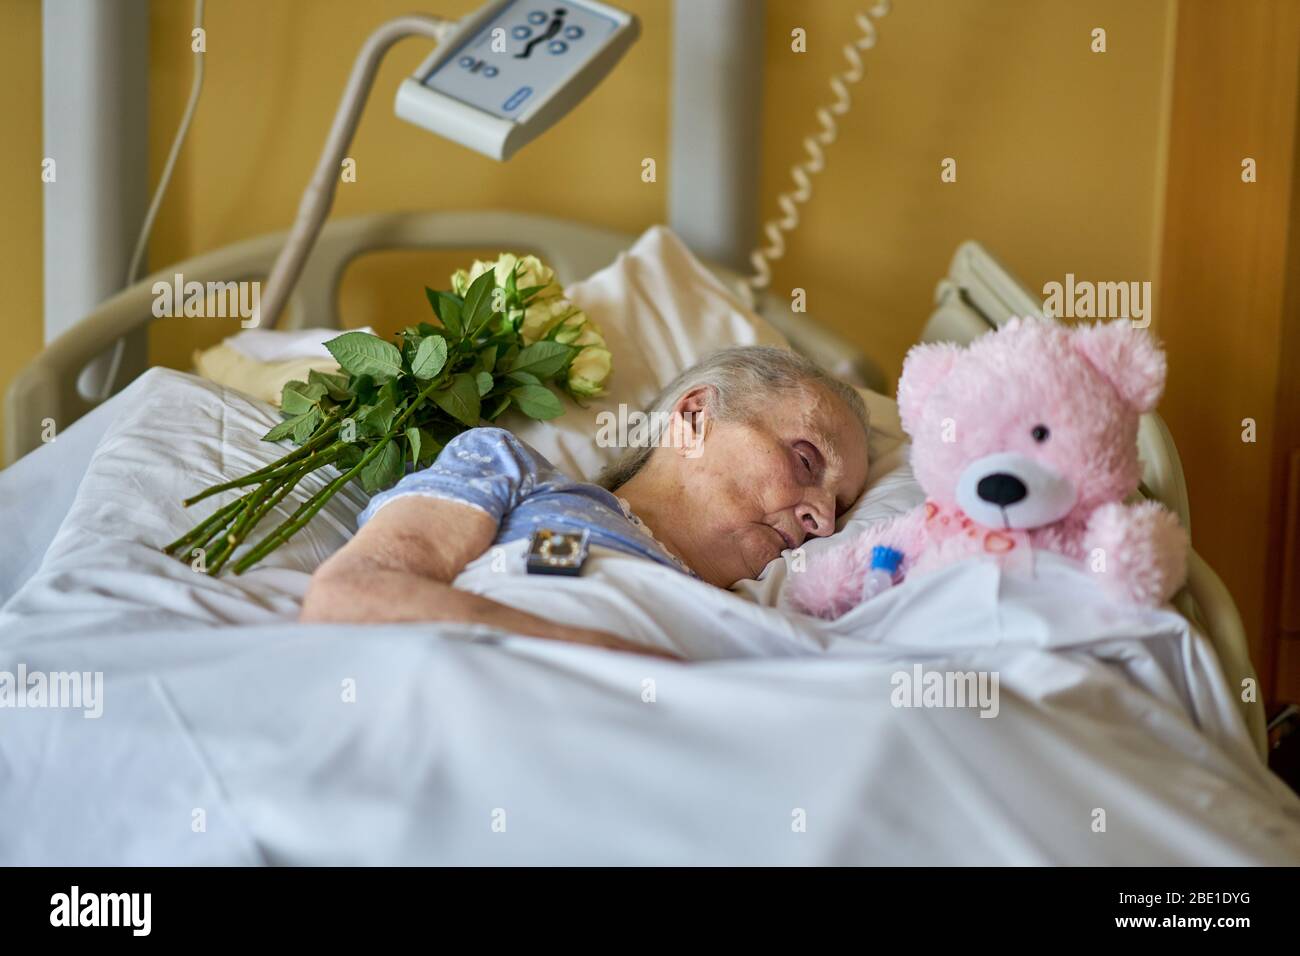 A woman lies dying in a hospital bed, surrounded by a one eyed teddybear and yellow roses. Stock Photo